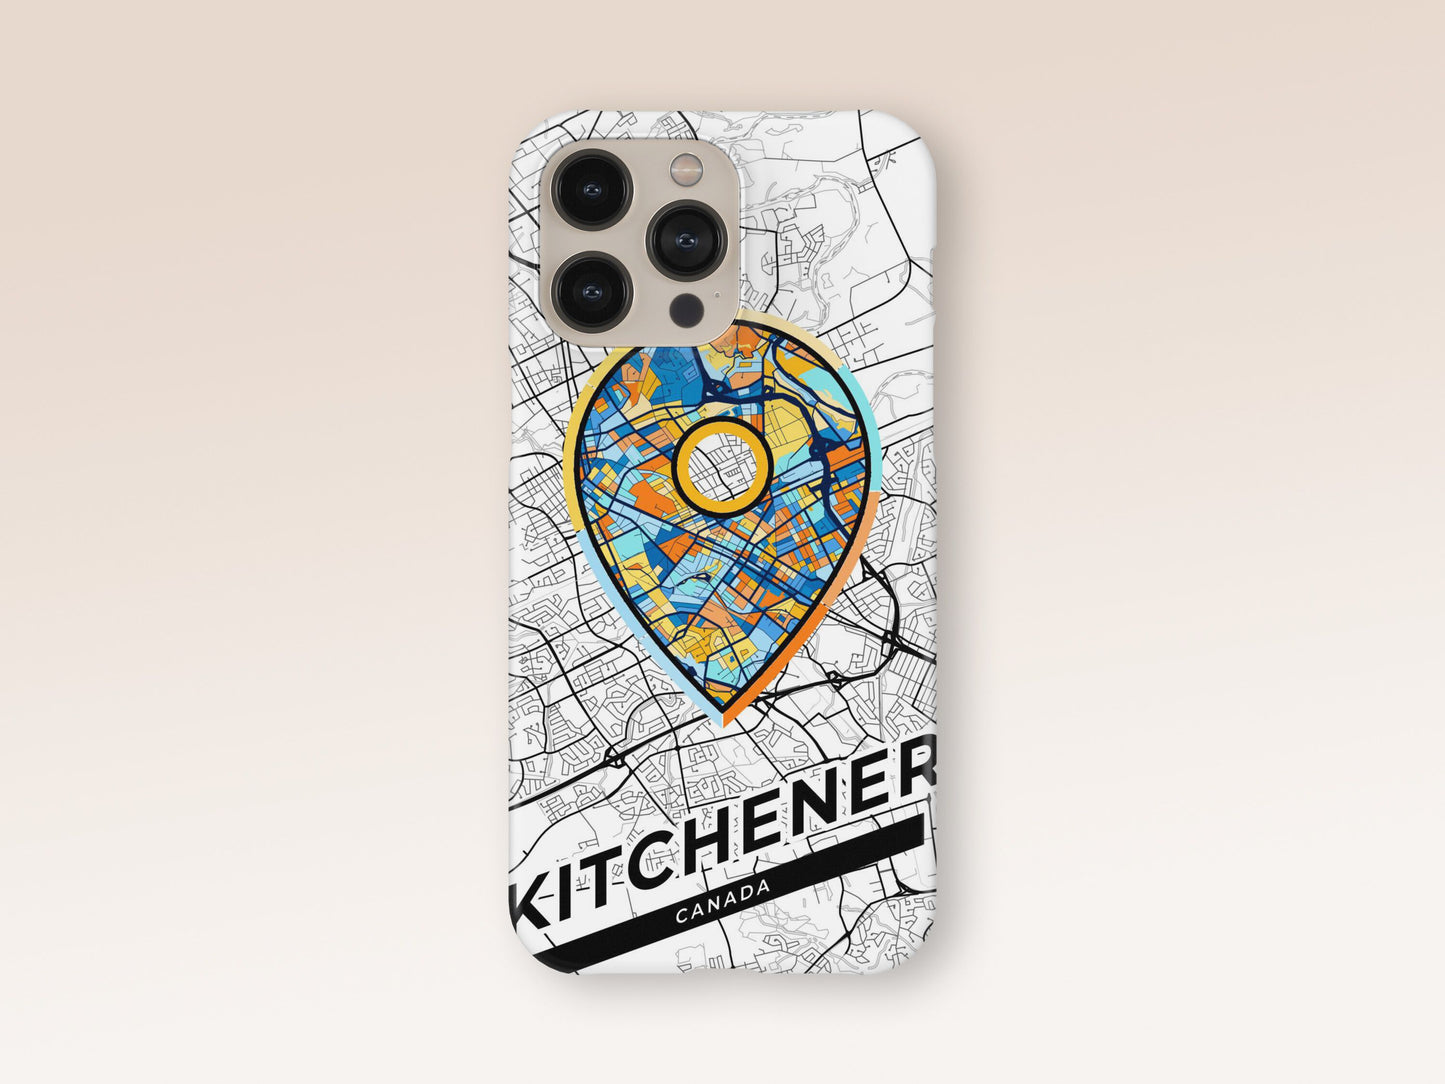 Kitchener Canada slim phone case with colorful icon. Birthday, wedding or housewarming gift. Couple match cases. 1